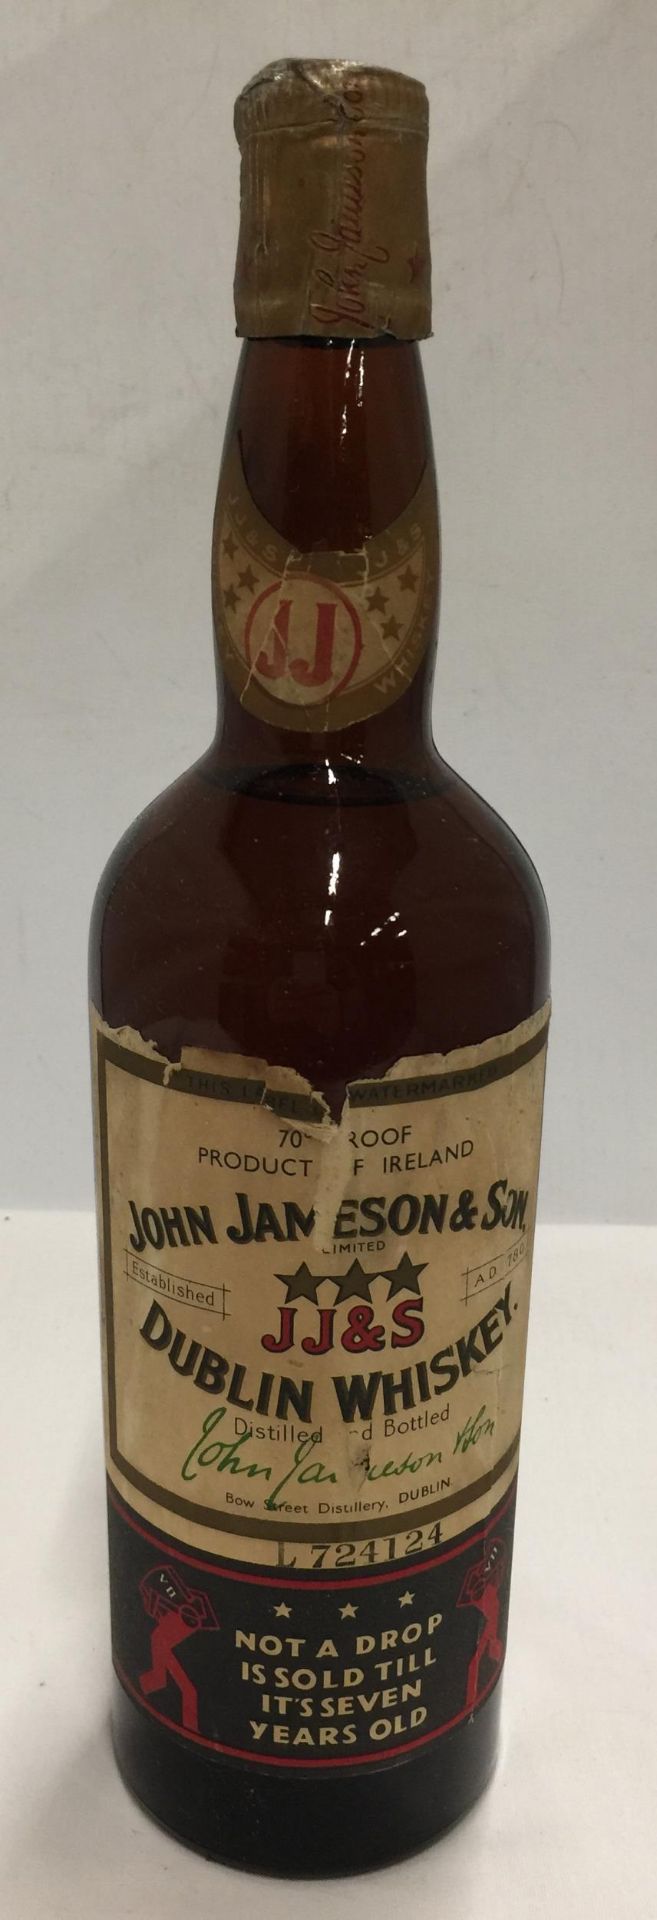 A JOHN JAMESON & SON J J & S DUBLIN WHISKEY 70 PROOF - NOT A DROP IS SOLD TILL IT'S SEVEN YEARS OLD